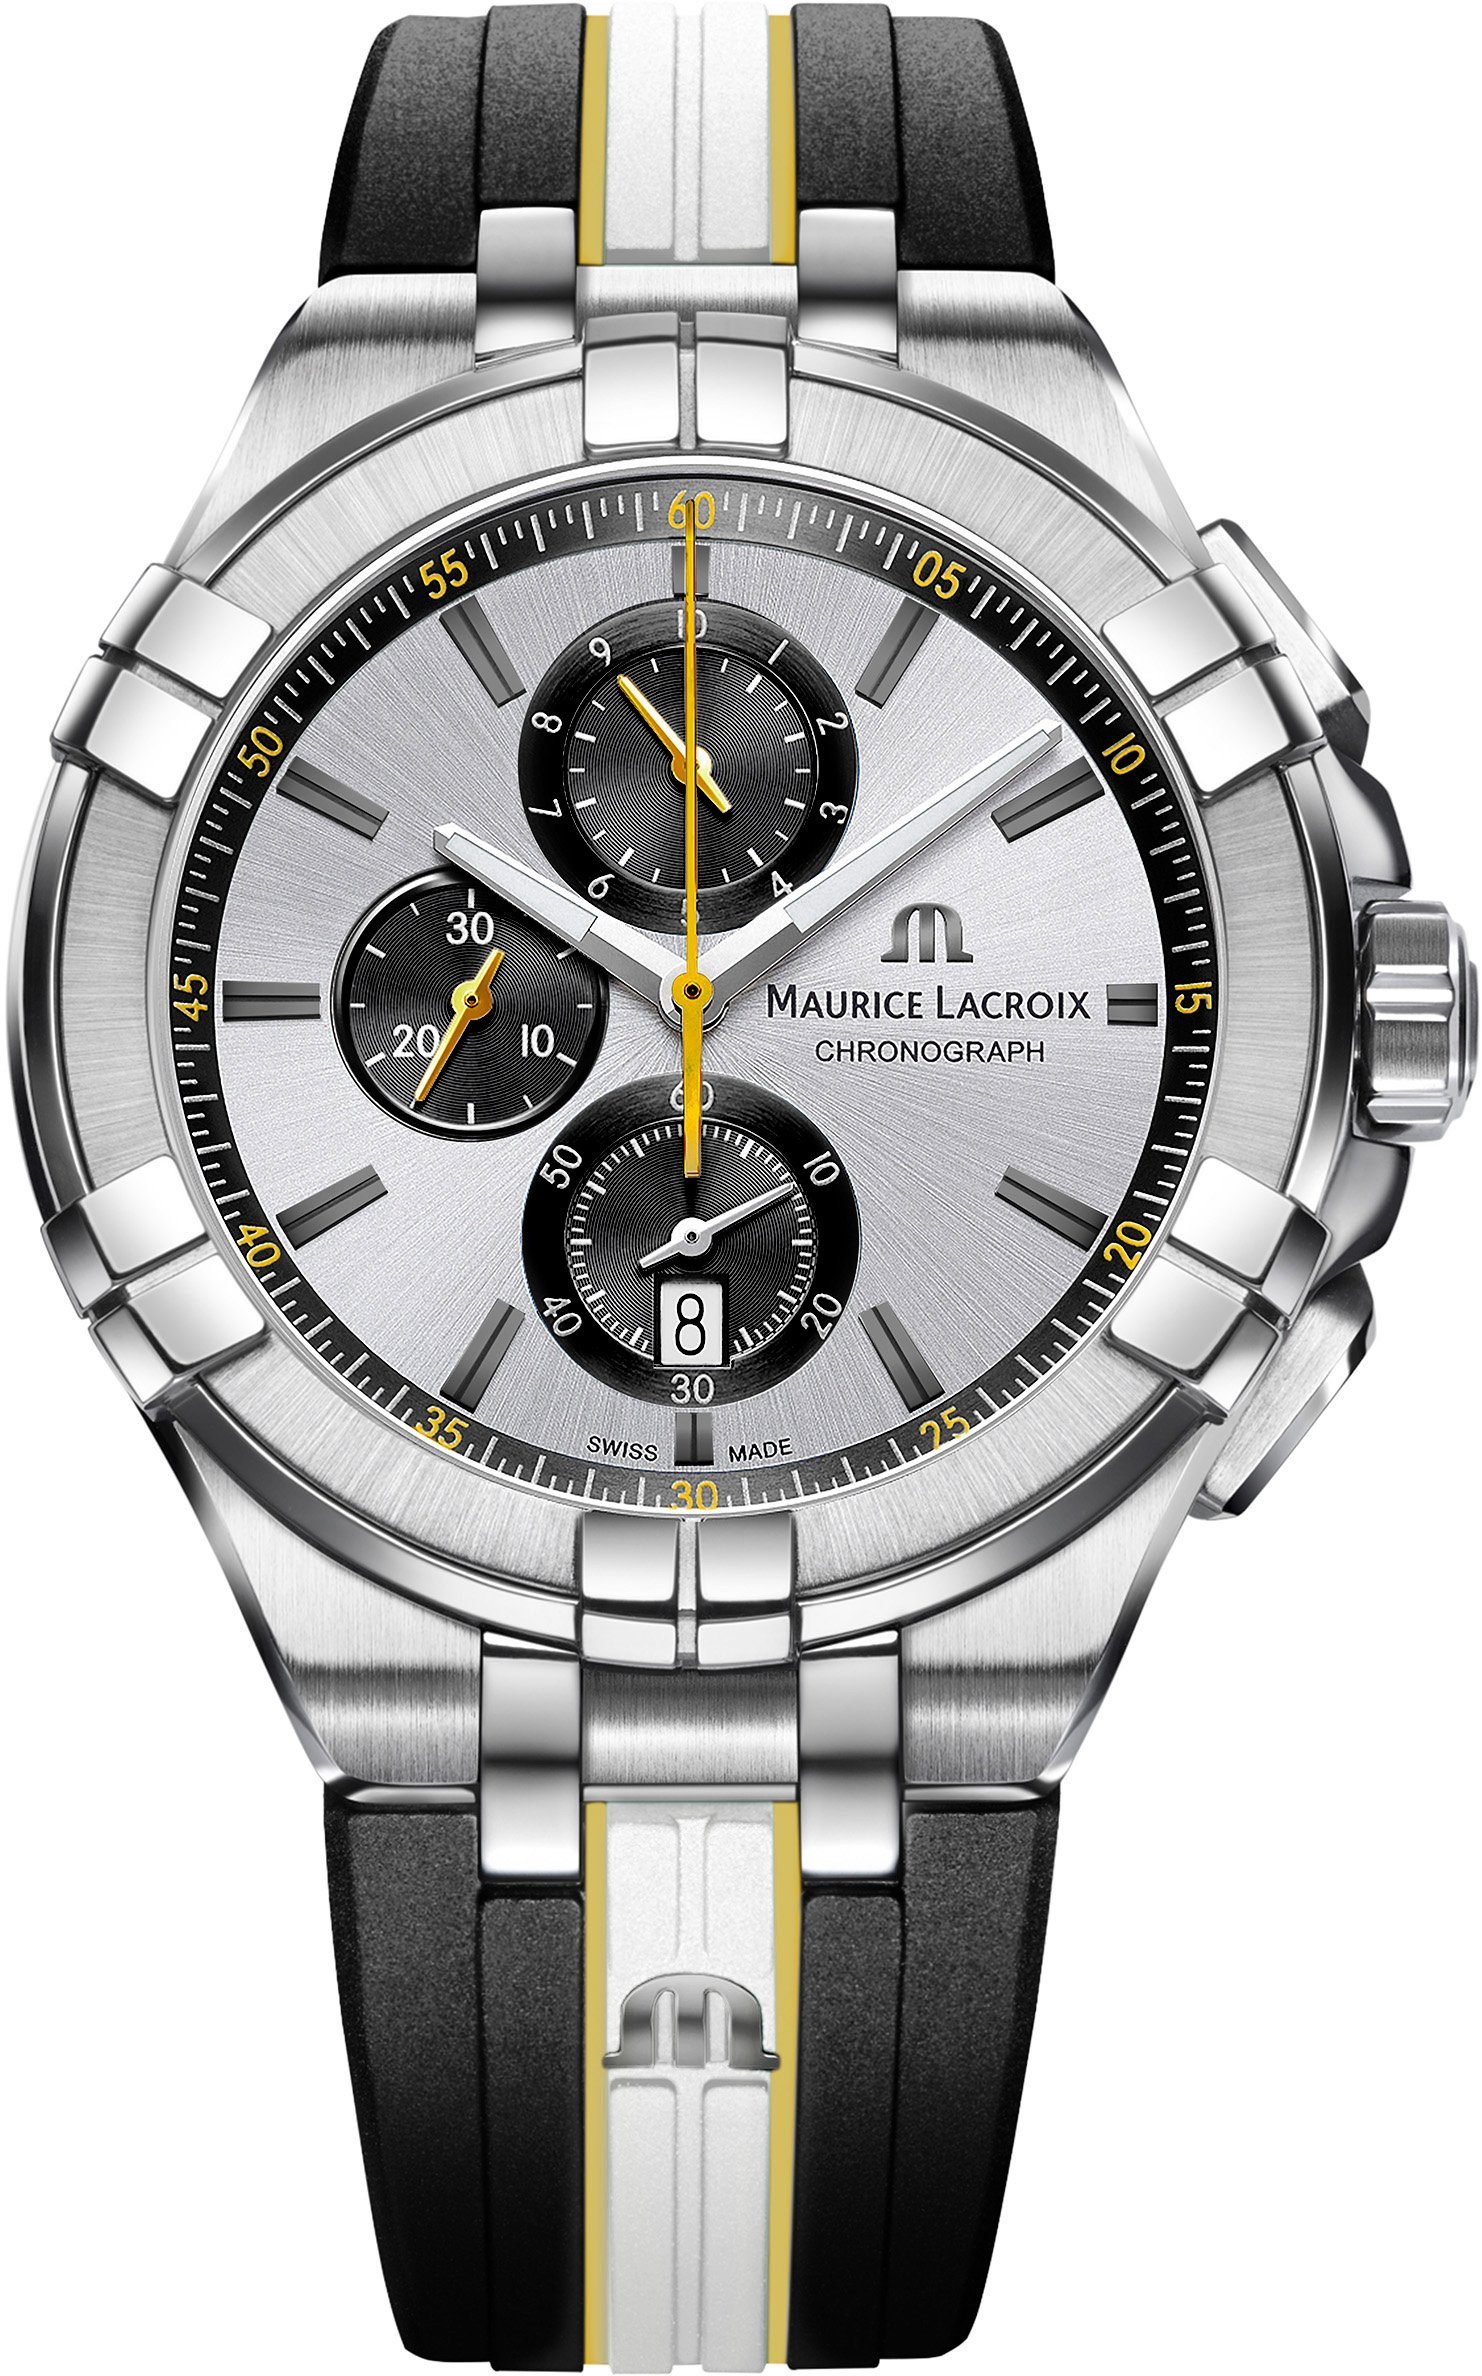 MAURICE LACROIX King of Aikon Chronograph Court, the -TT030-130-K, Edition AI1018 Chronograph Special